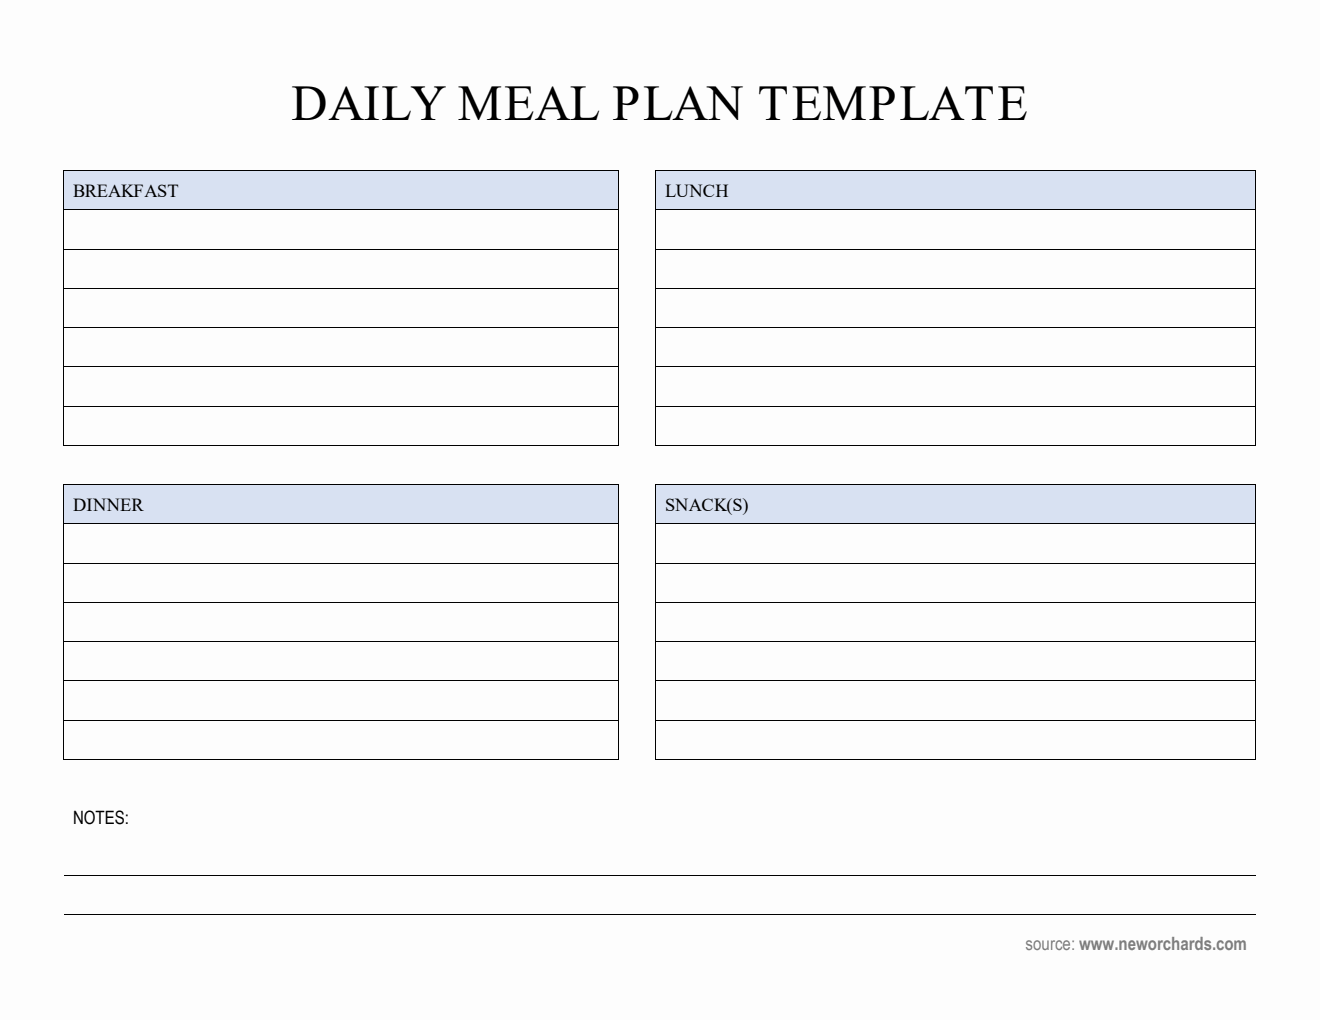 Editable Daily Meal Plan Template in PDF